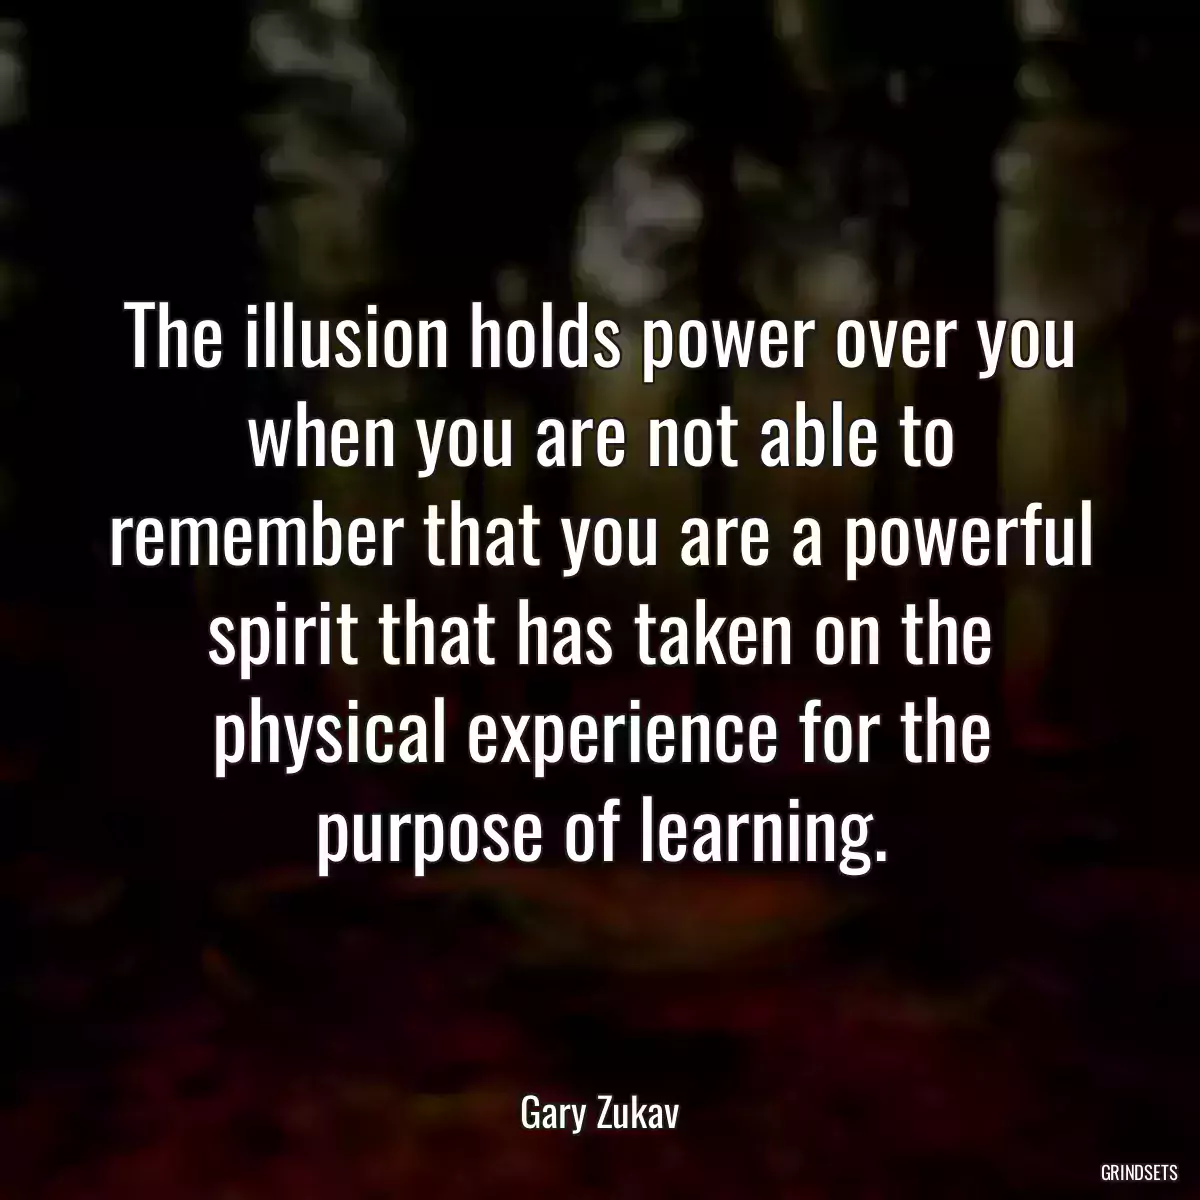 The illusion holds power over you when you are not able to remember that you are a powerful spirit that has taken on the physical experience for the purpose of learning.